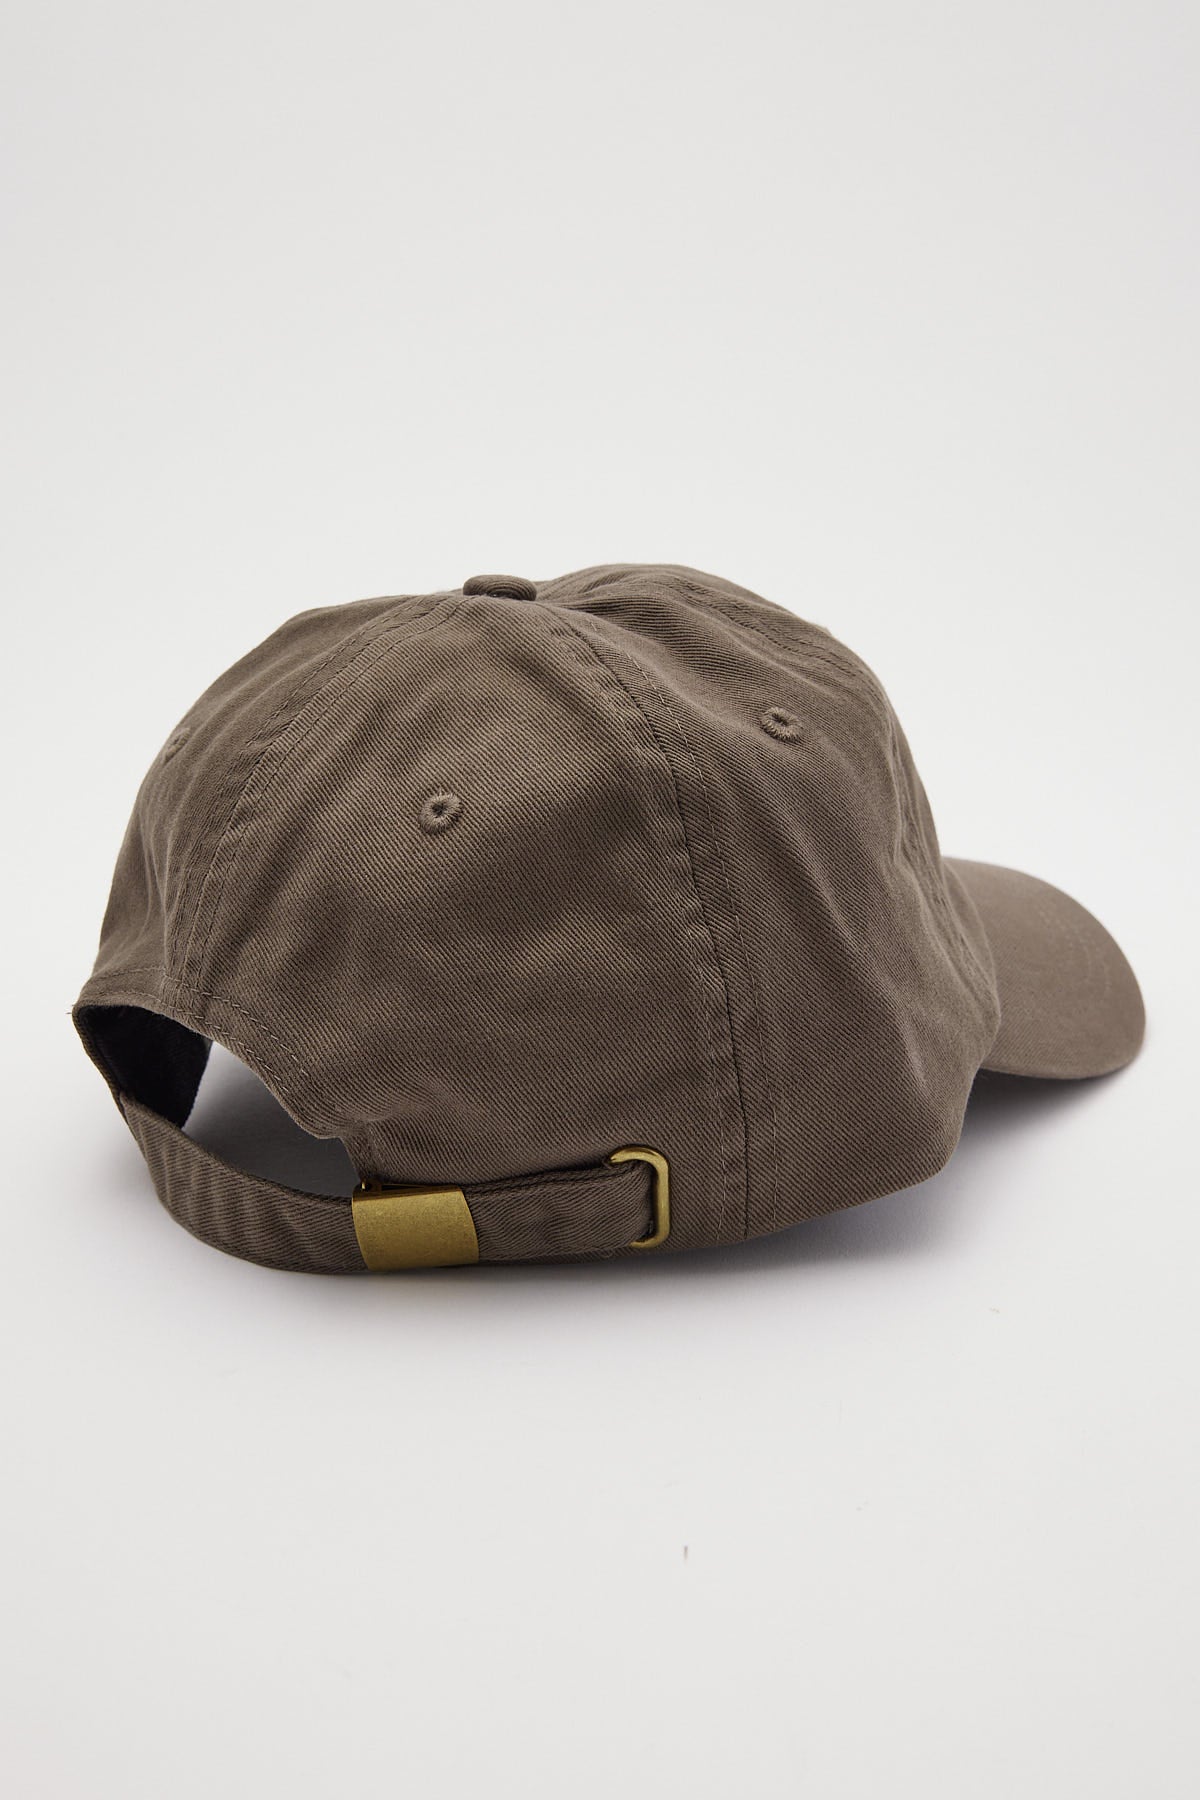 Common Need Symbiosis Dad Cap Taupe